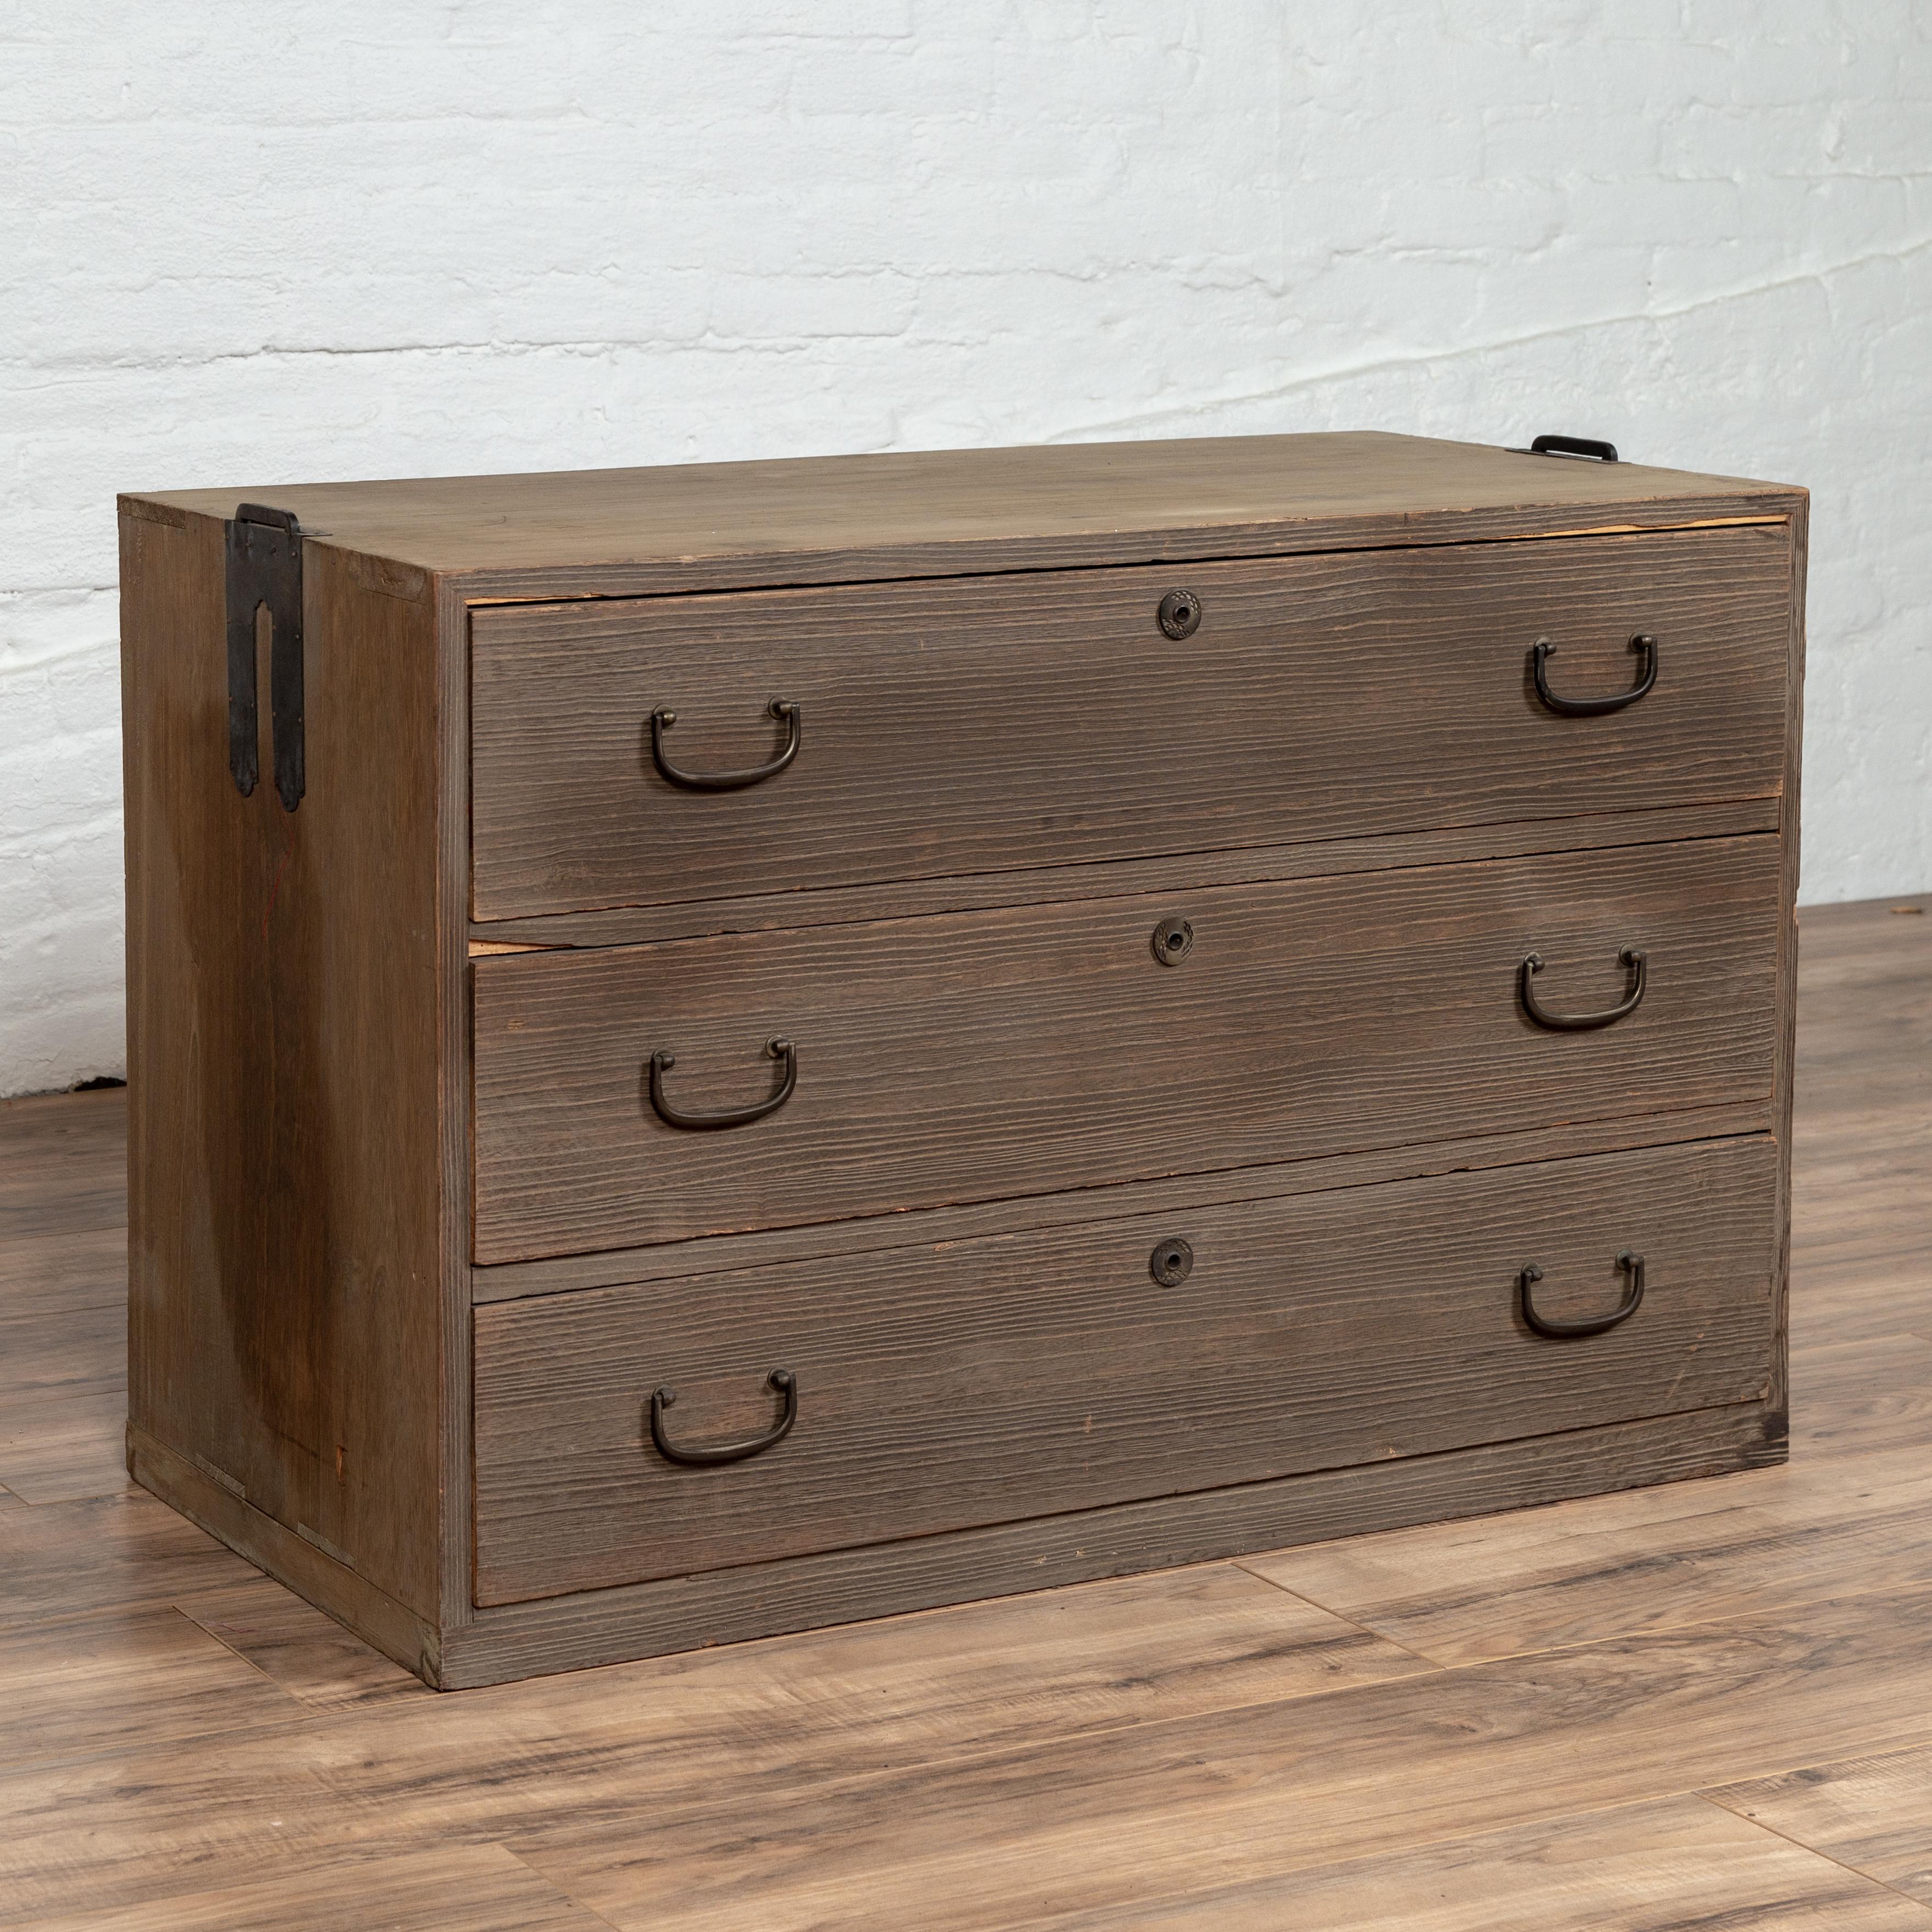 An antique Japanese Meiji period tansu chest from the 19th century, with three drawers, carrying handles and greyish patina. Born in Japan during the Meiji period, this tansu traveling chest-of-drawers features a rectangular top sitting above three